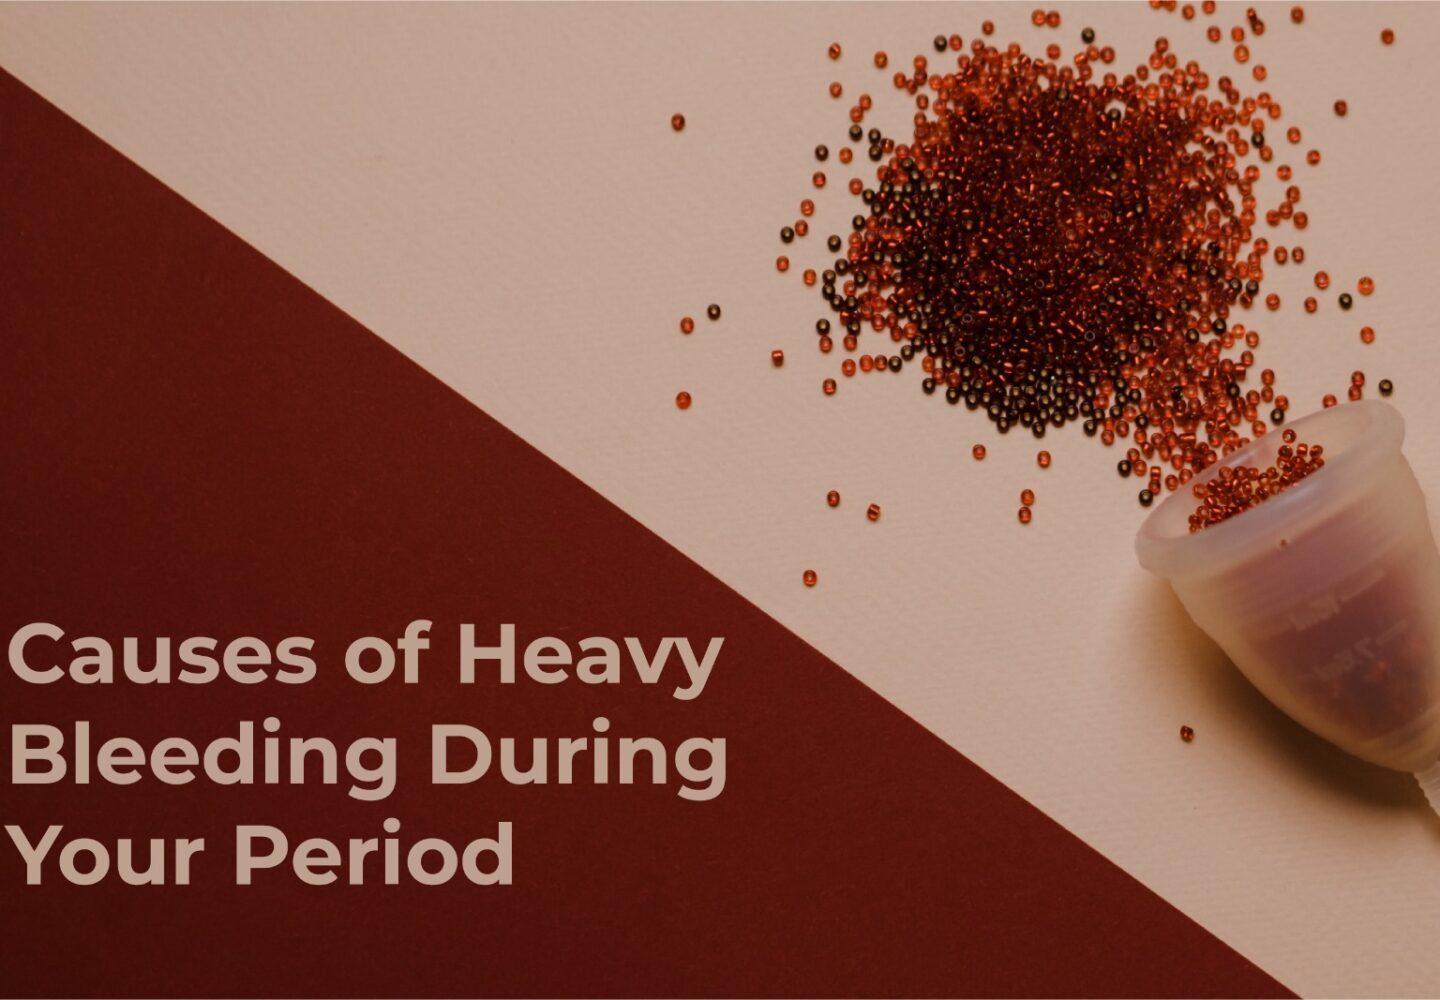 Heavy Bleeding During Your Period